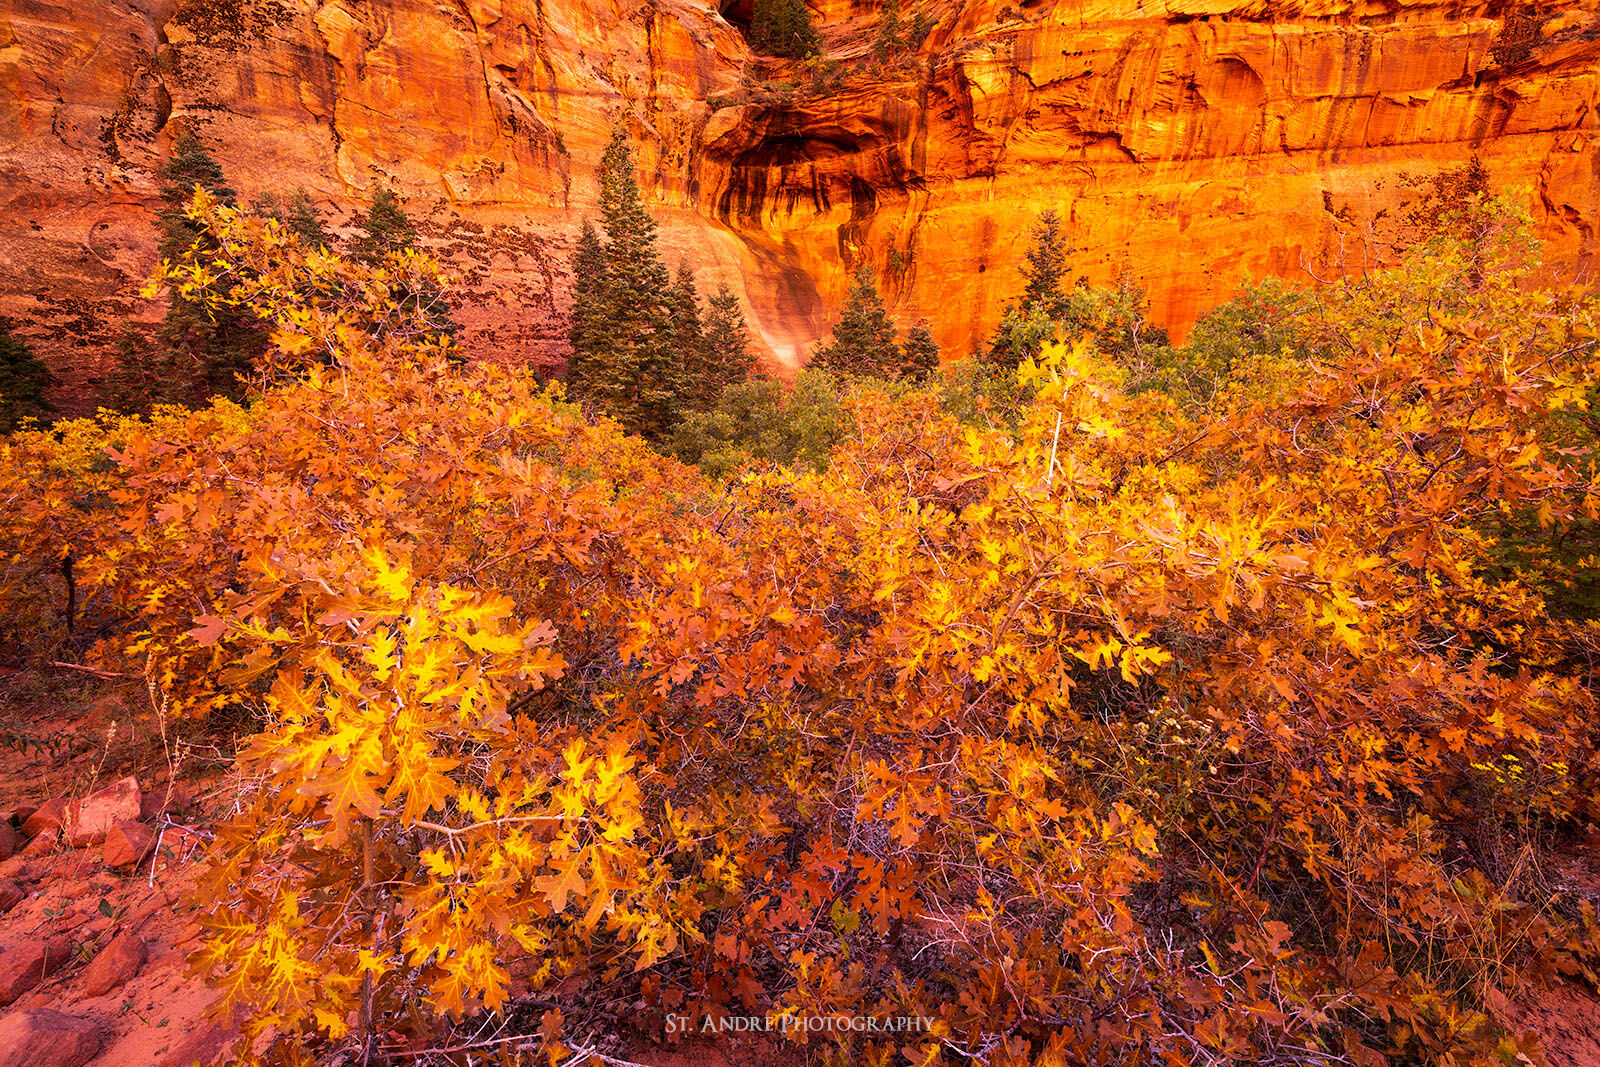 Shrub Oak in fall colors within a deep canyon in Zion National Park